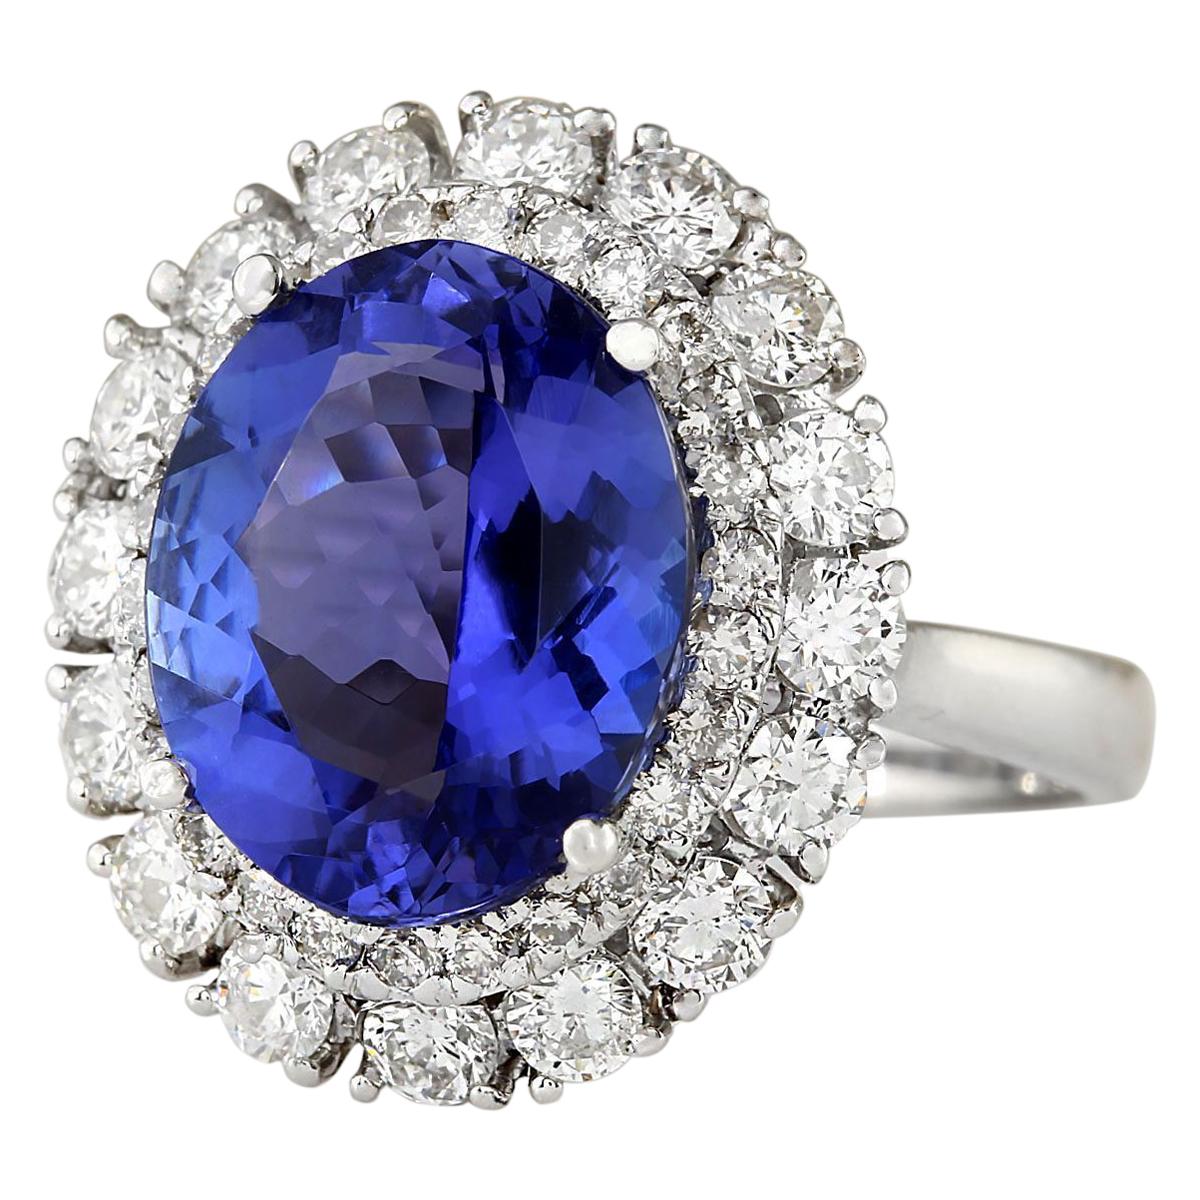 Introducing our mesmerizing 7.38 Carat Tanzanite 14 Karat White Gold Diamond Ring. Crafted from stamped 14K White Gold, this ring boasts a weight of 6.1 grams, ensuring both quality and durability. The centerpiece is a stunning tanzanite gemstone